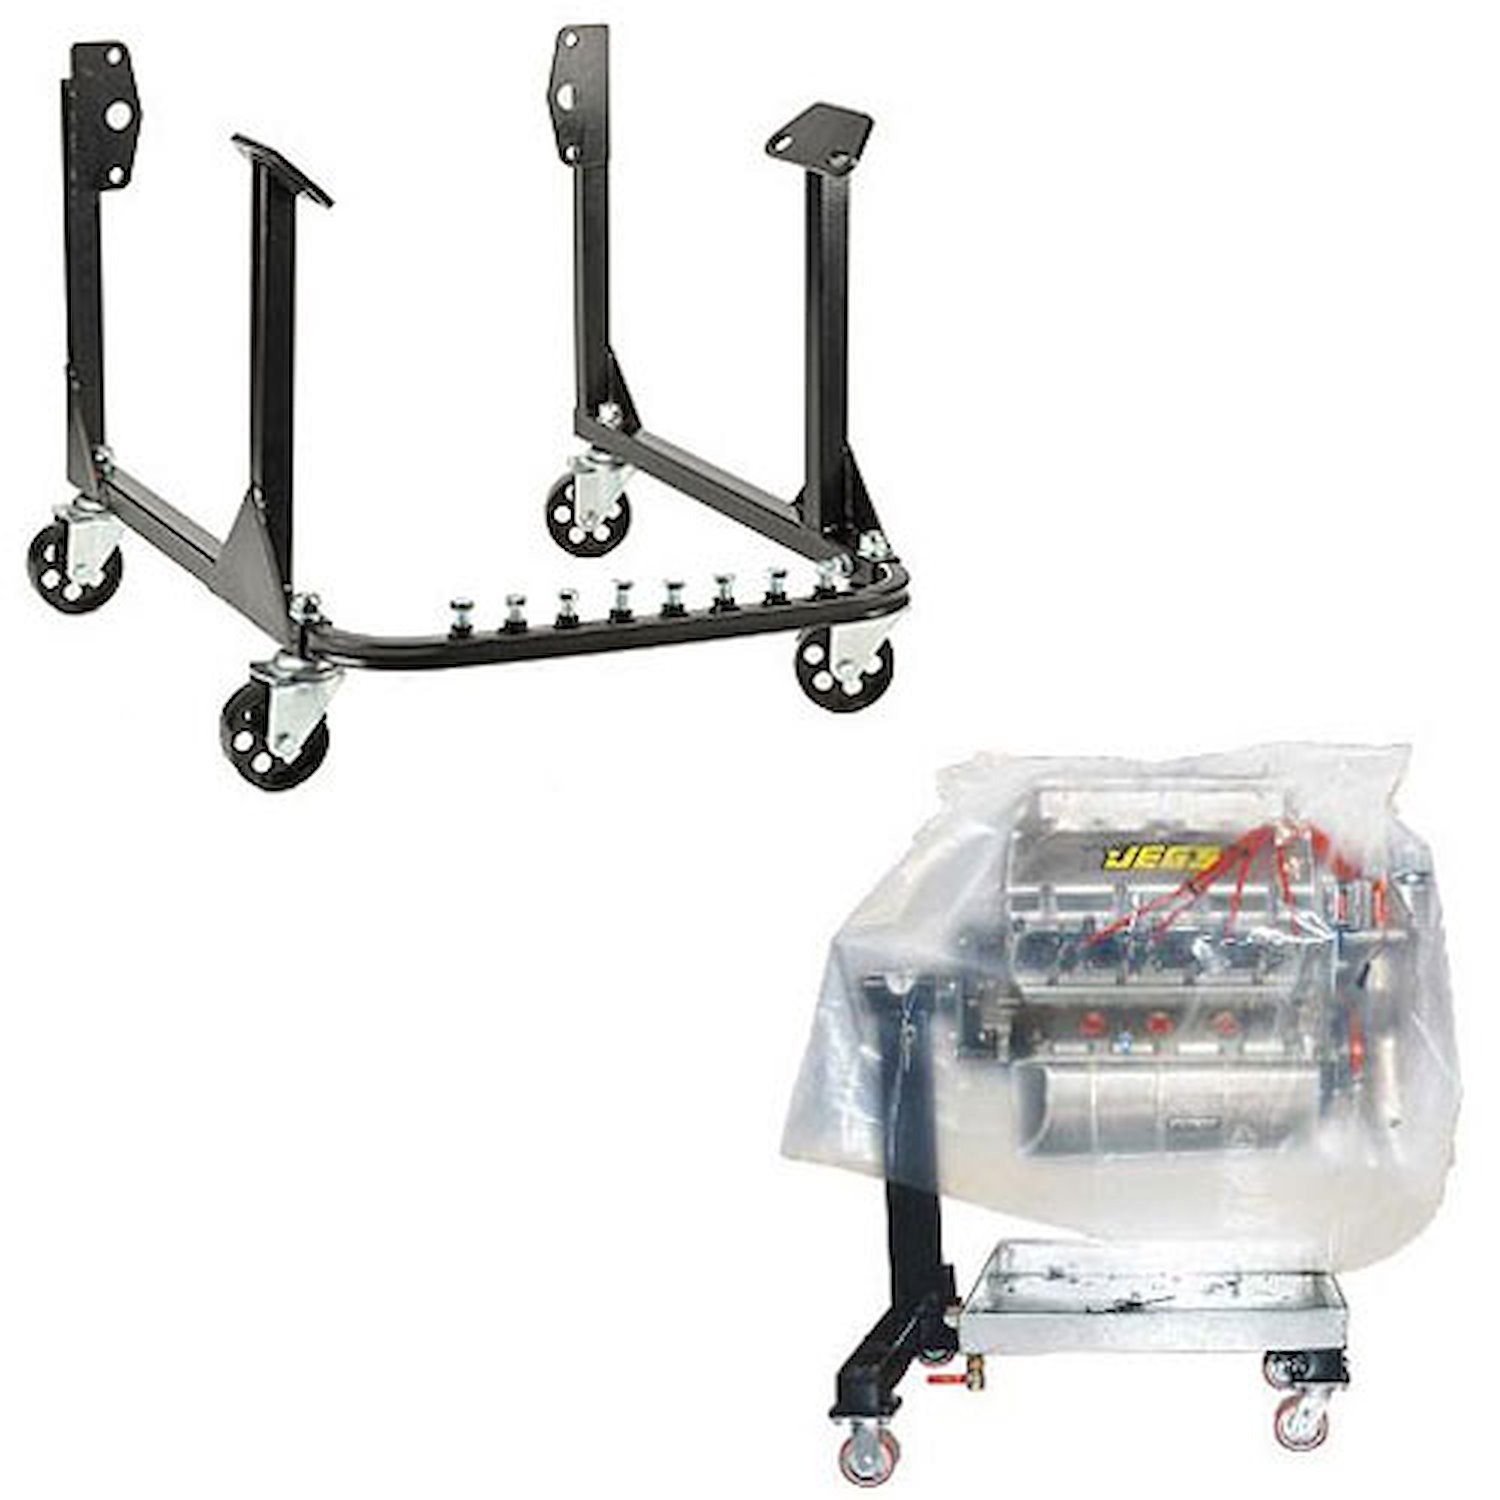 Engine Cradle and Bag Kit for Small Block